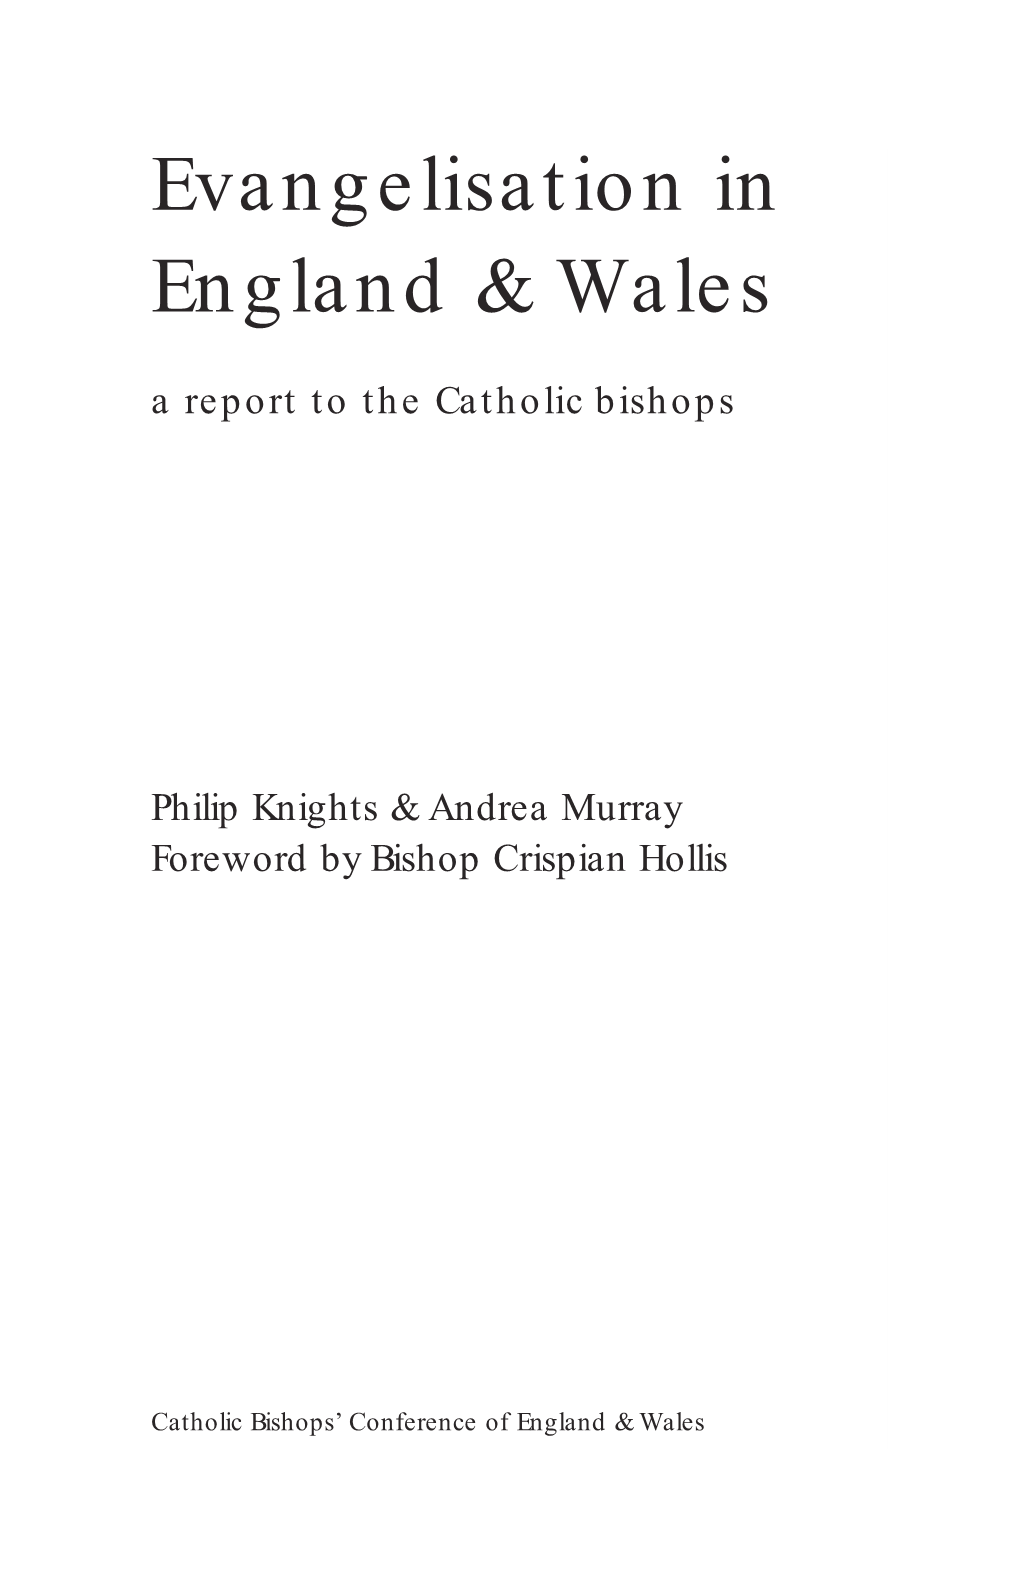 Evangelisation in England & Wales a Report to the Catholic Bishops